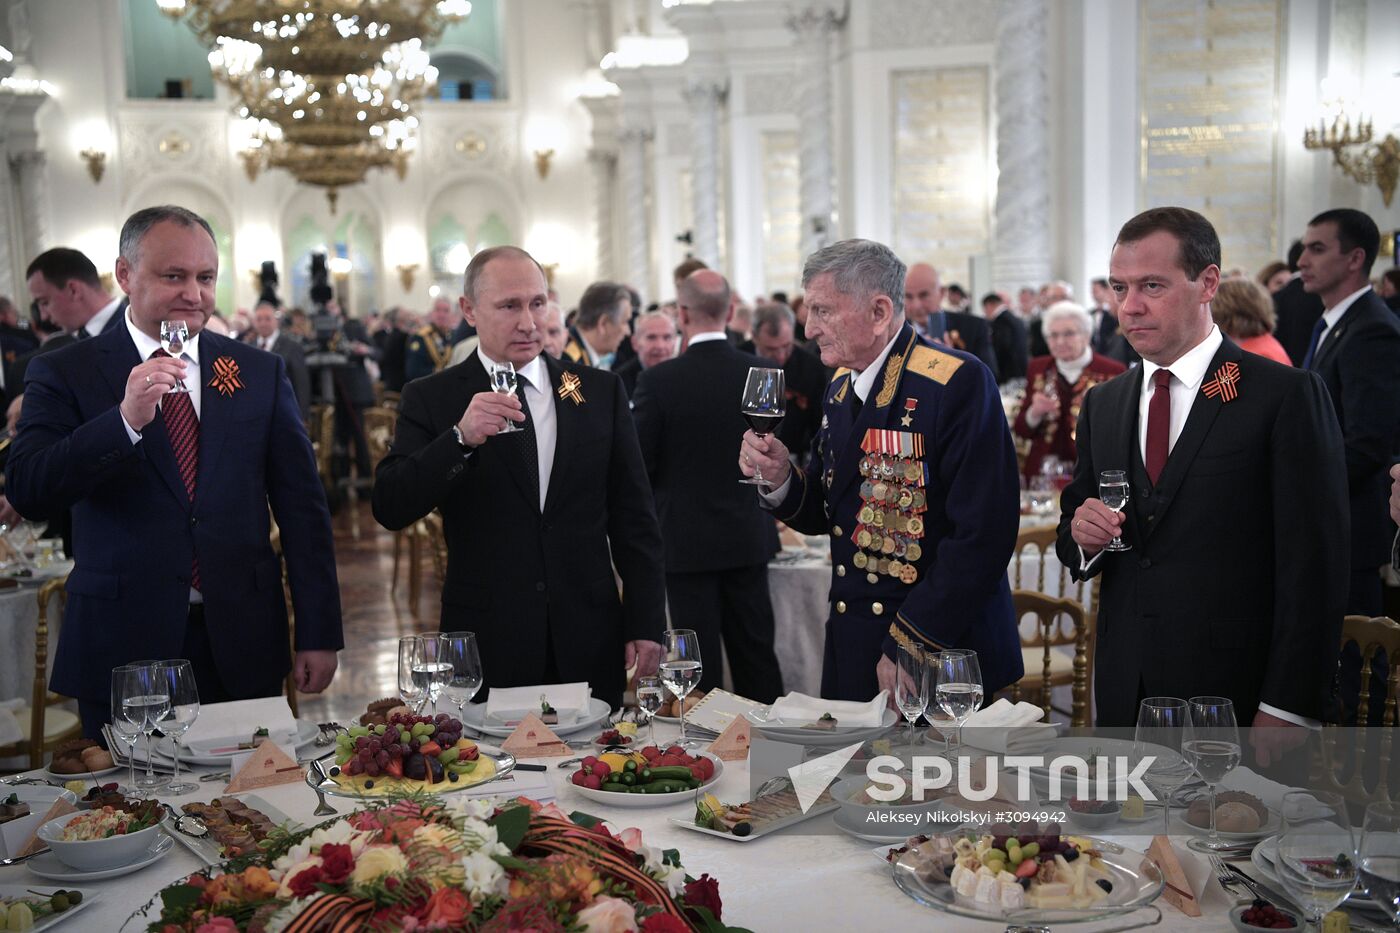 Reception on behalf of Russian President marking the 72nd anniversary of Victory in Great Patriotic War